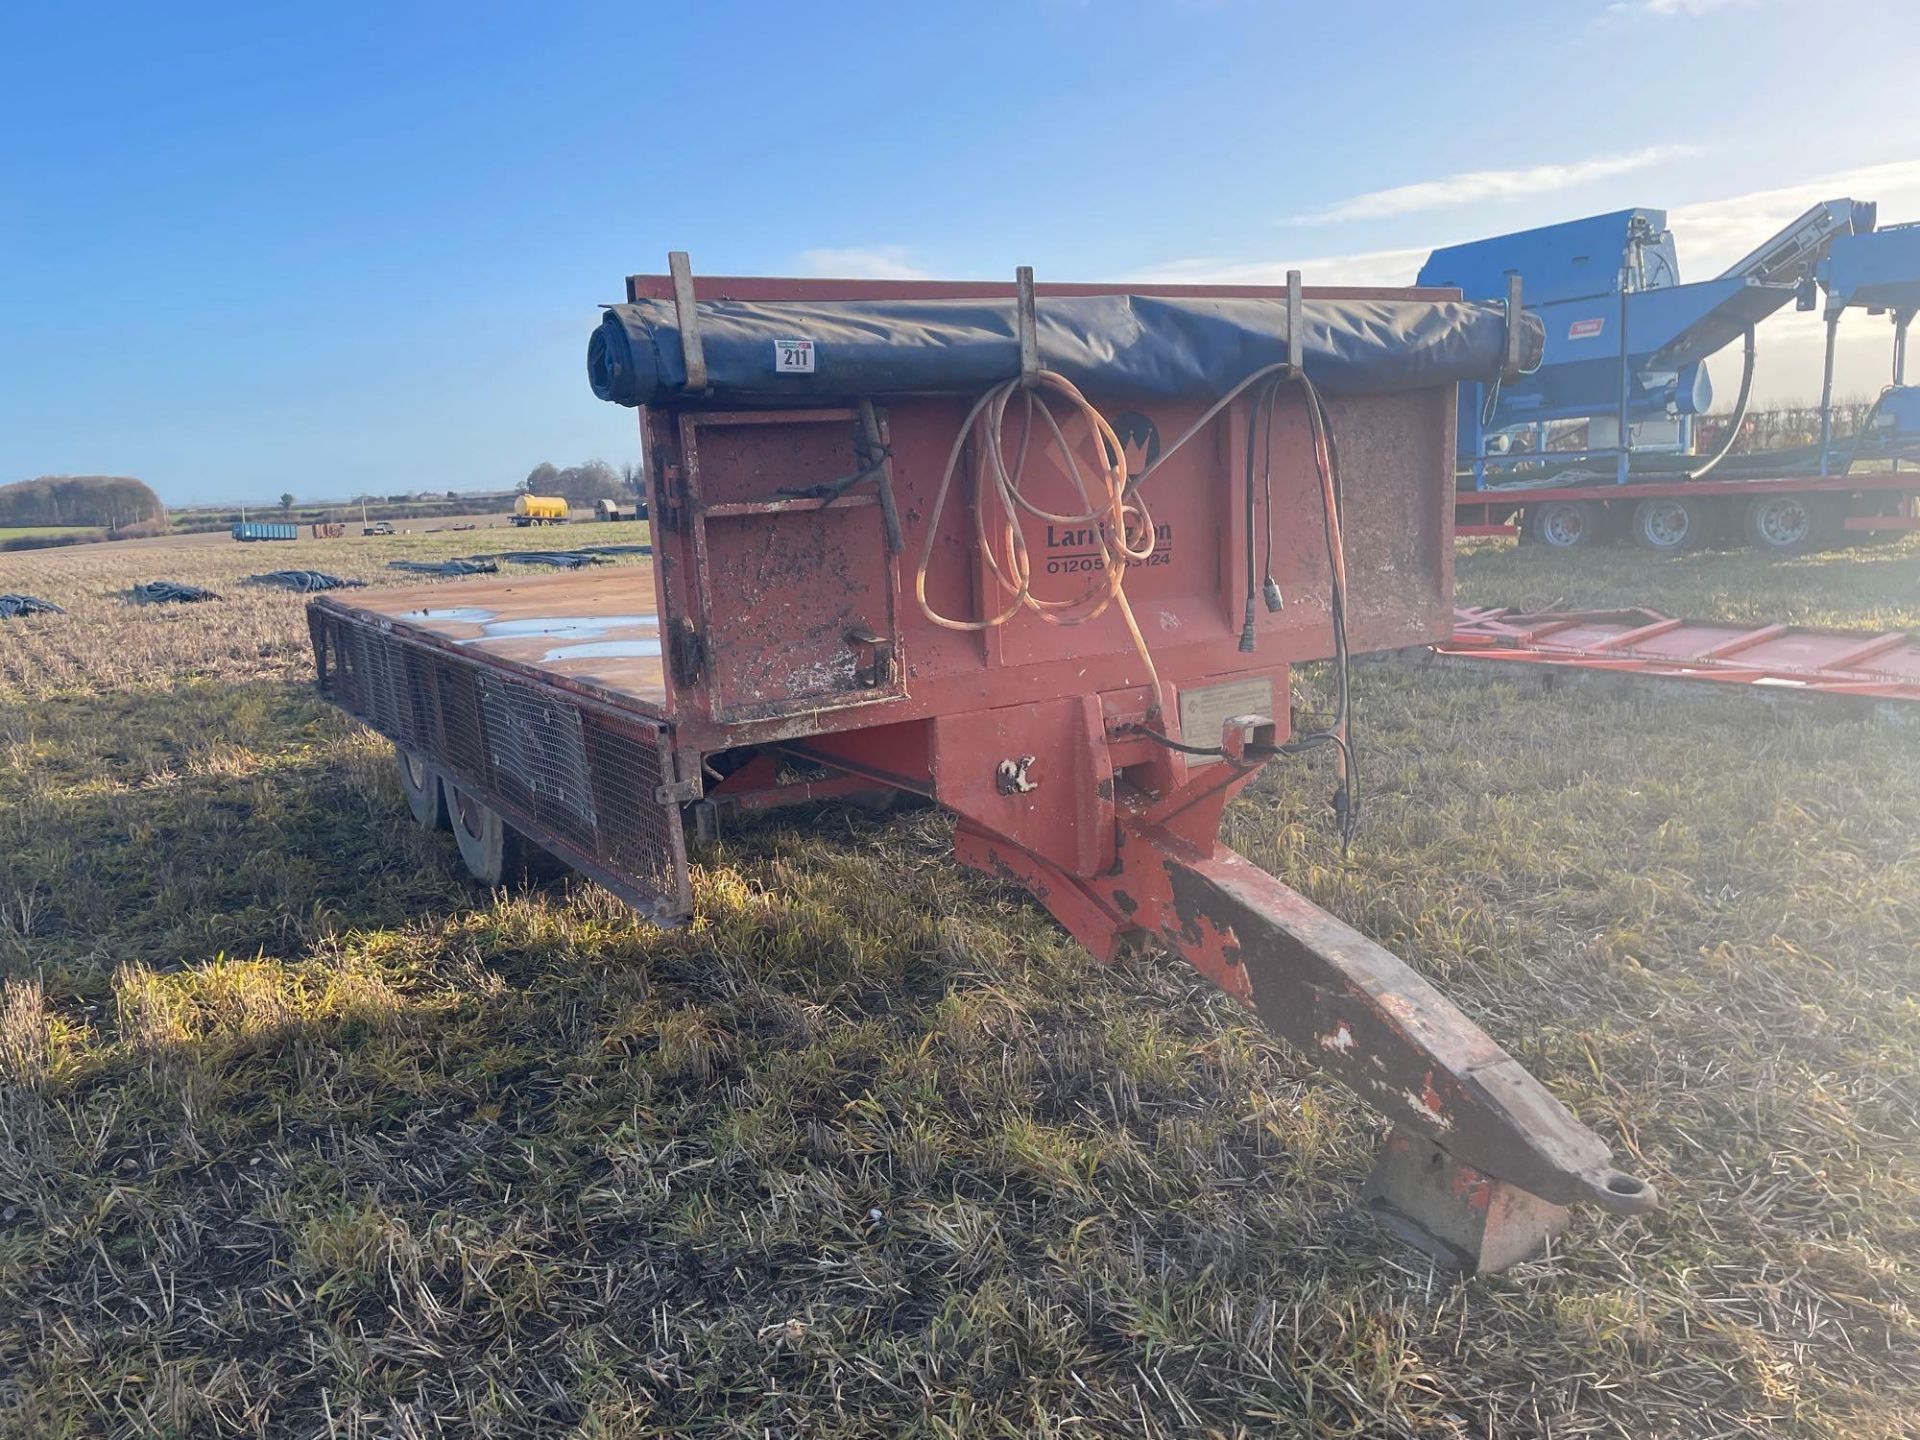 1995 Richard Larrington twin axle flatbed trailer with commercial axle, hydraulic brakes, sprung dra